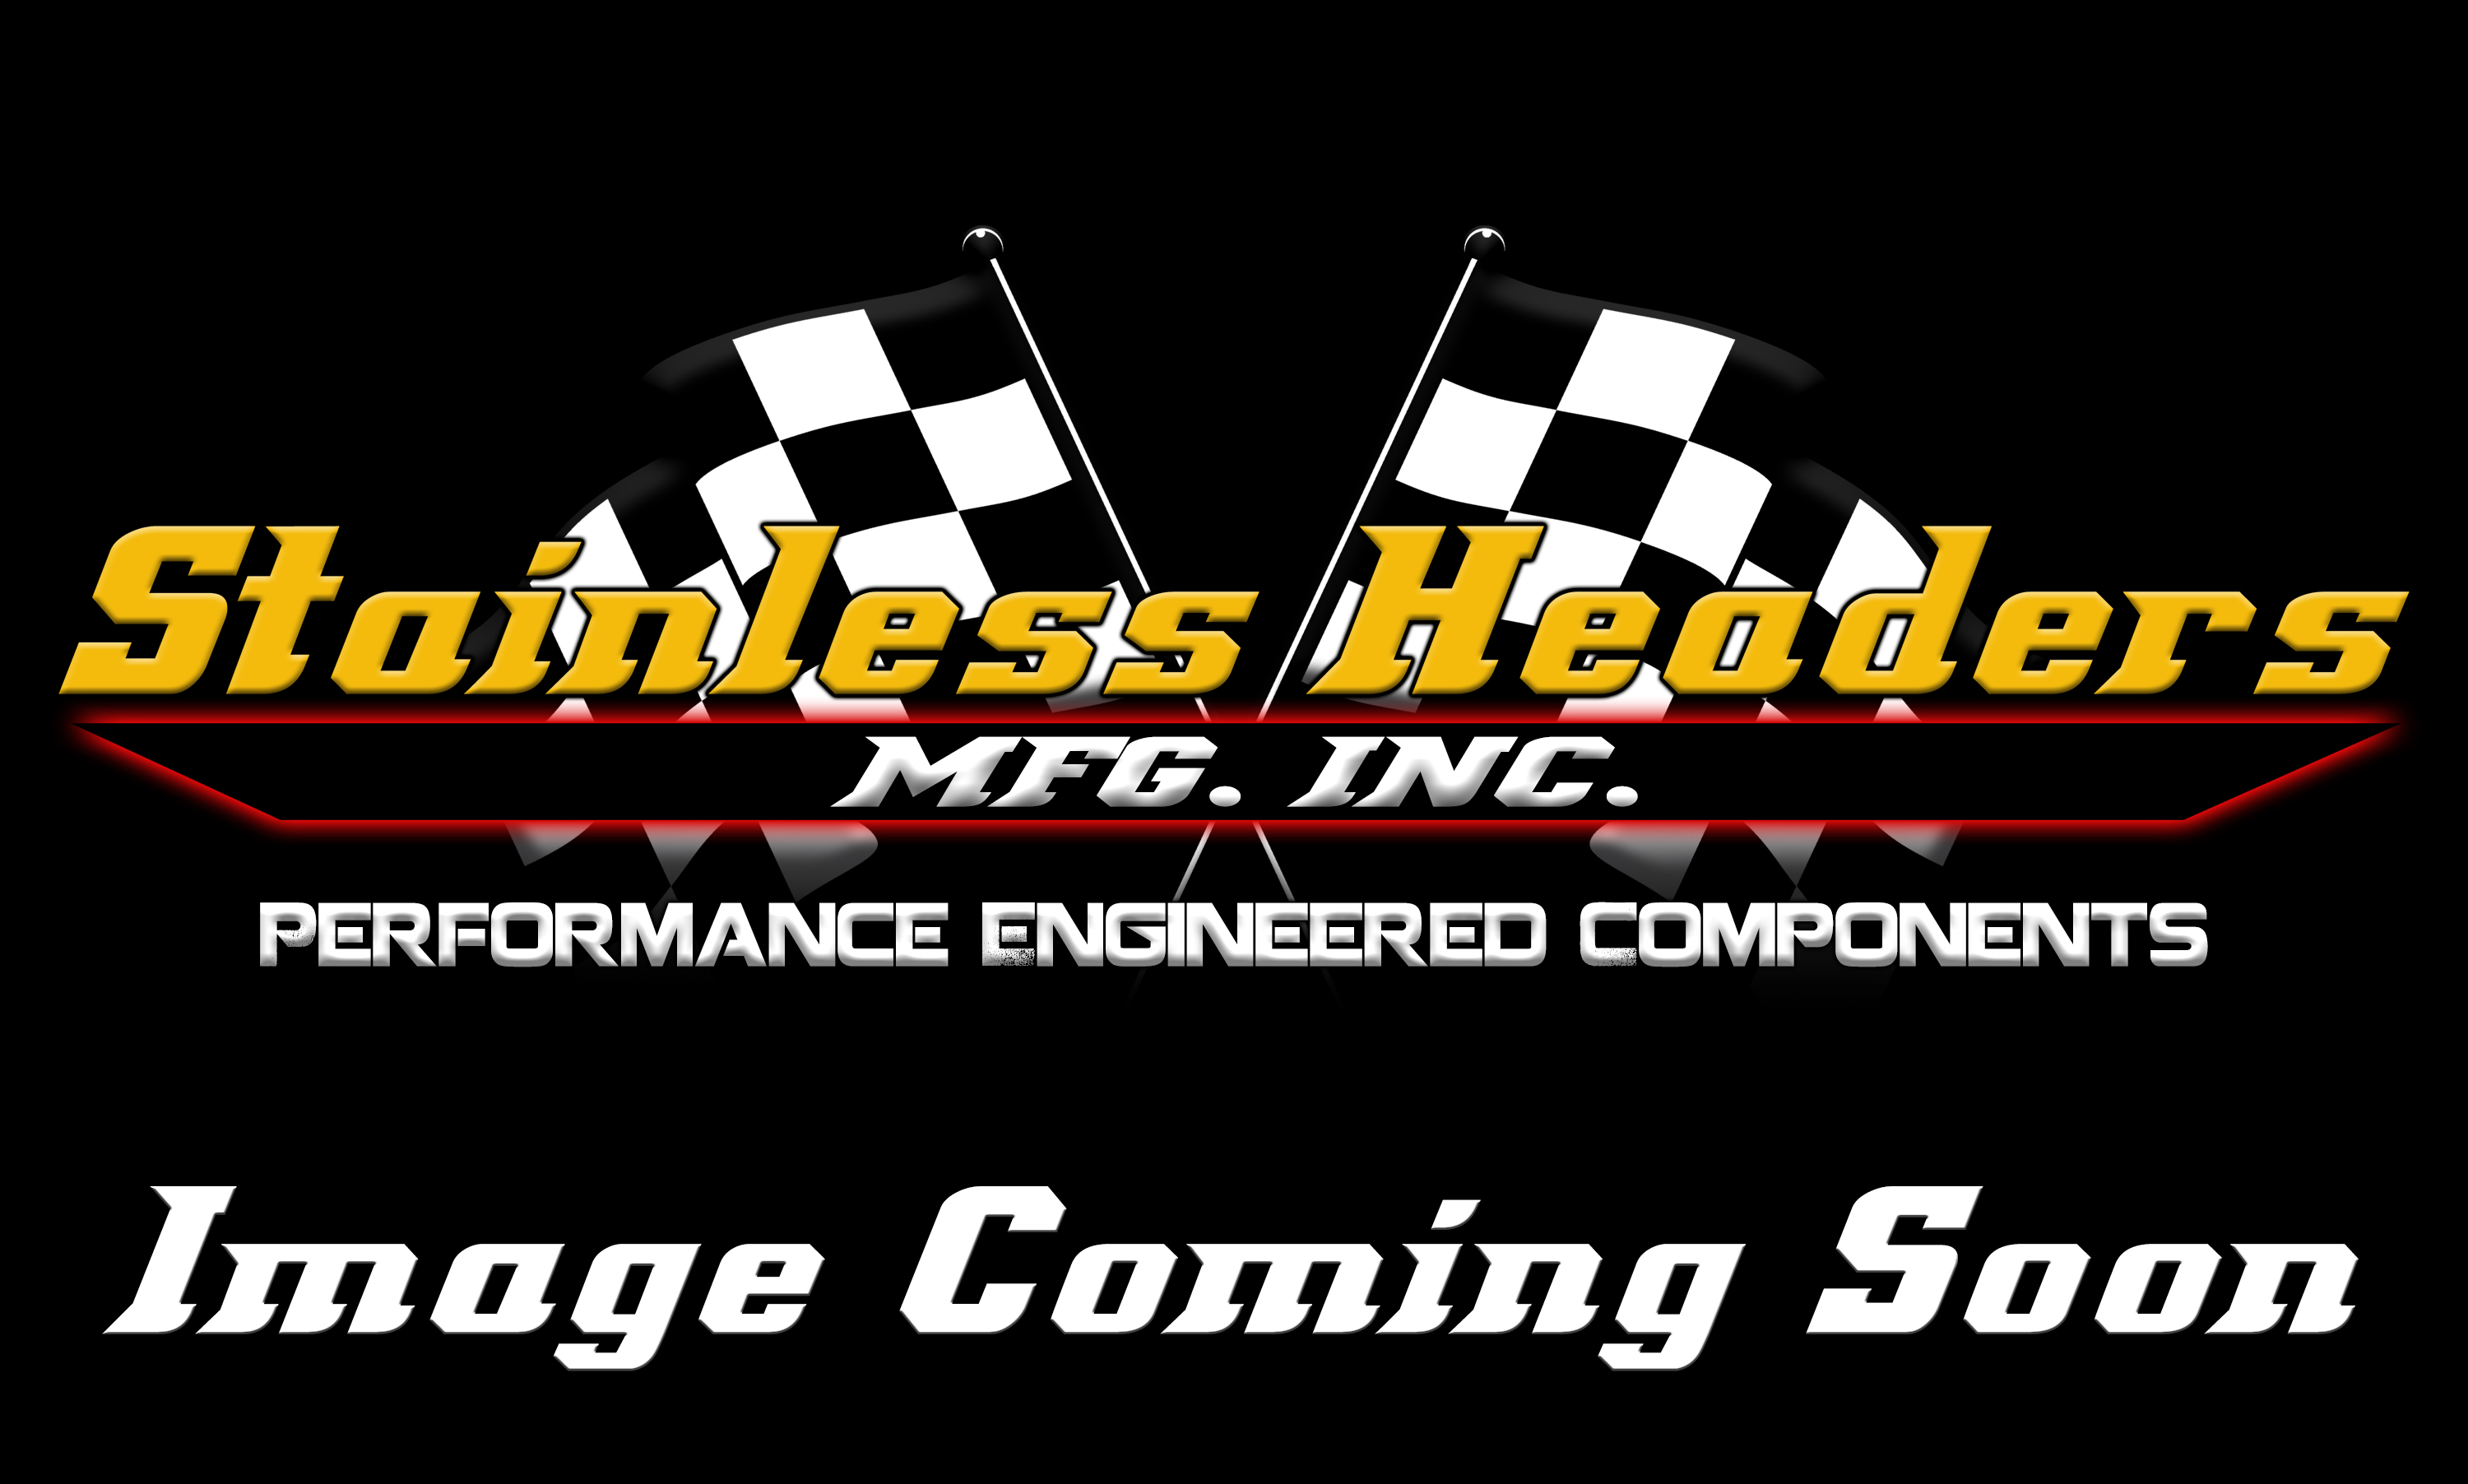 Custom Header Components - Merge Collectors - Stainless Headers - 1 7/8" Primary 4 into 1 Performance Merge Collector-16ga 321ss